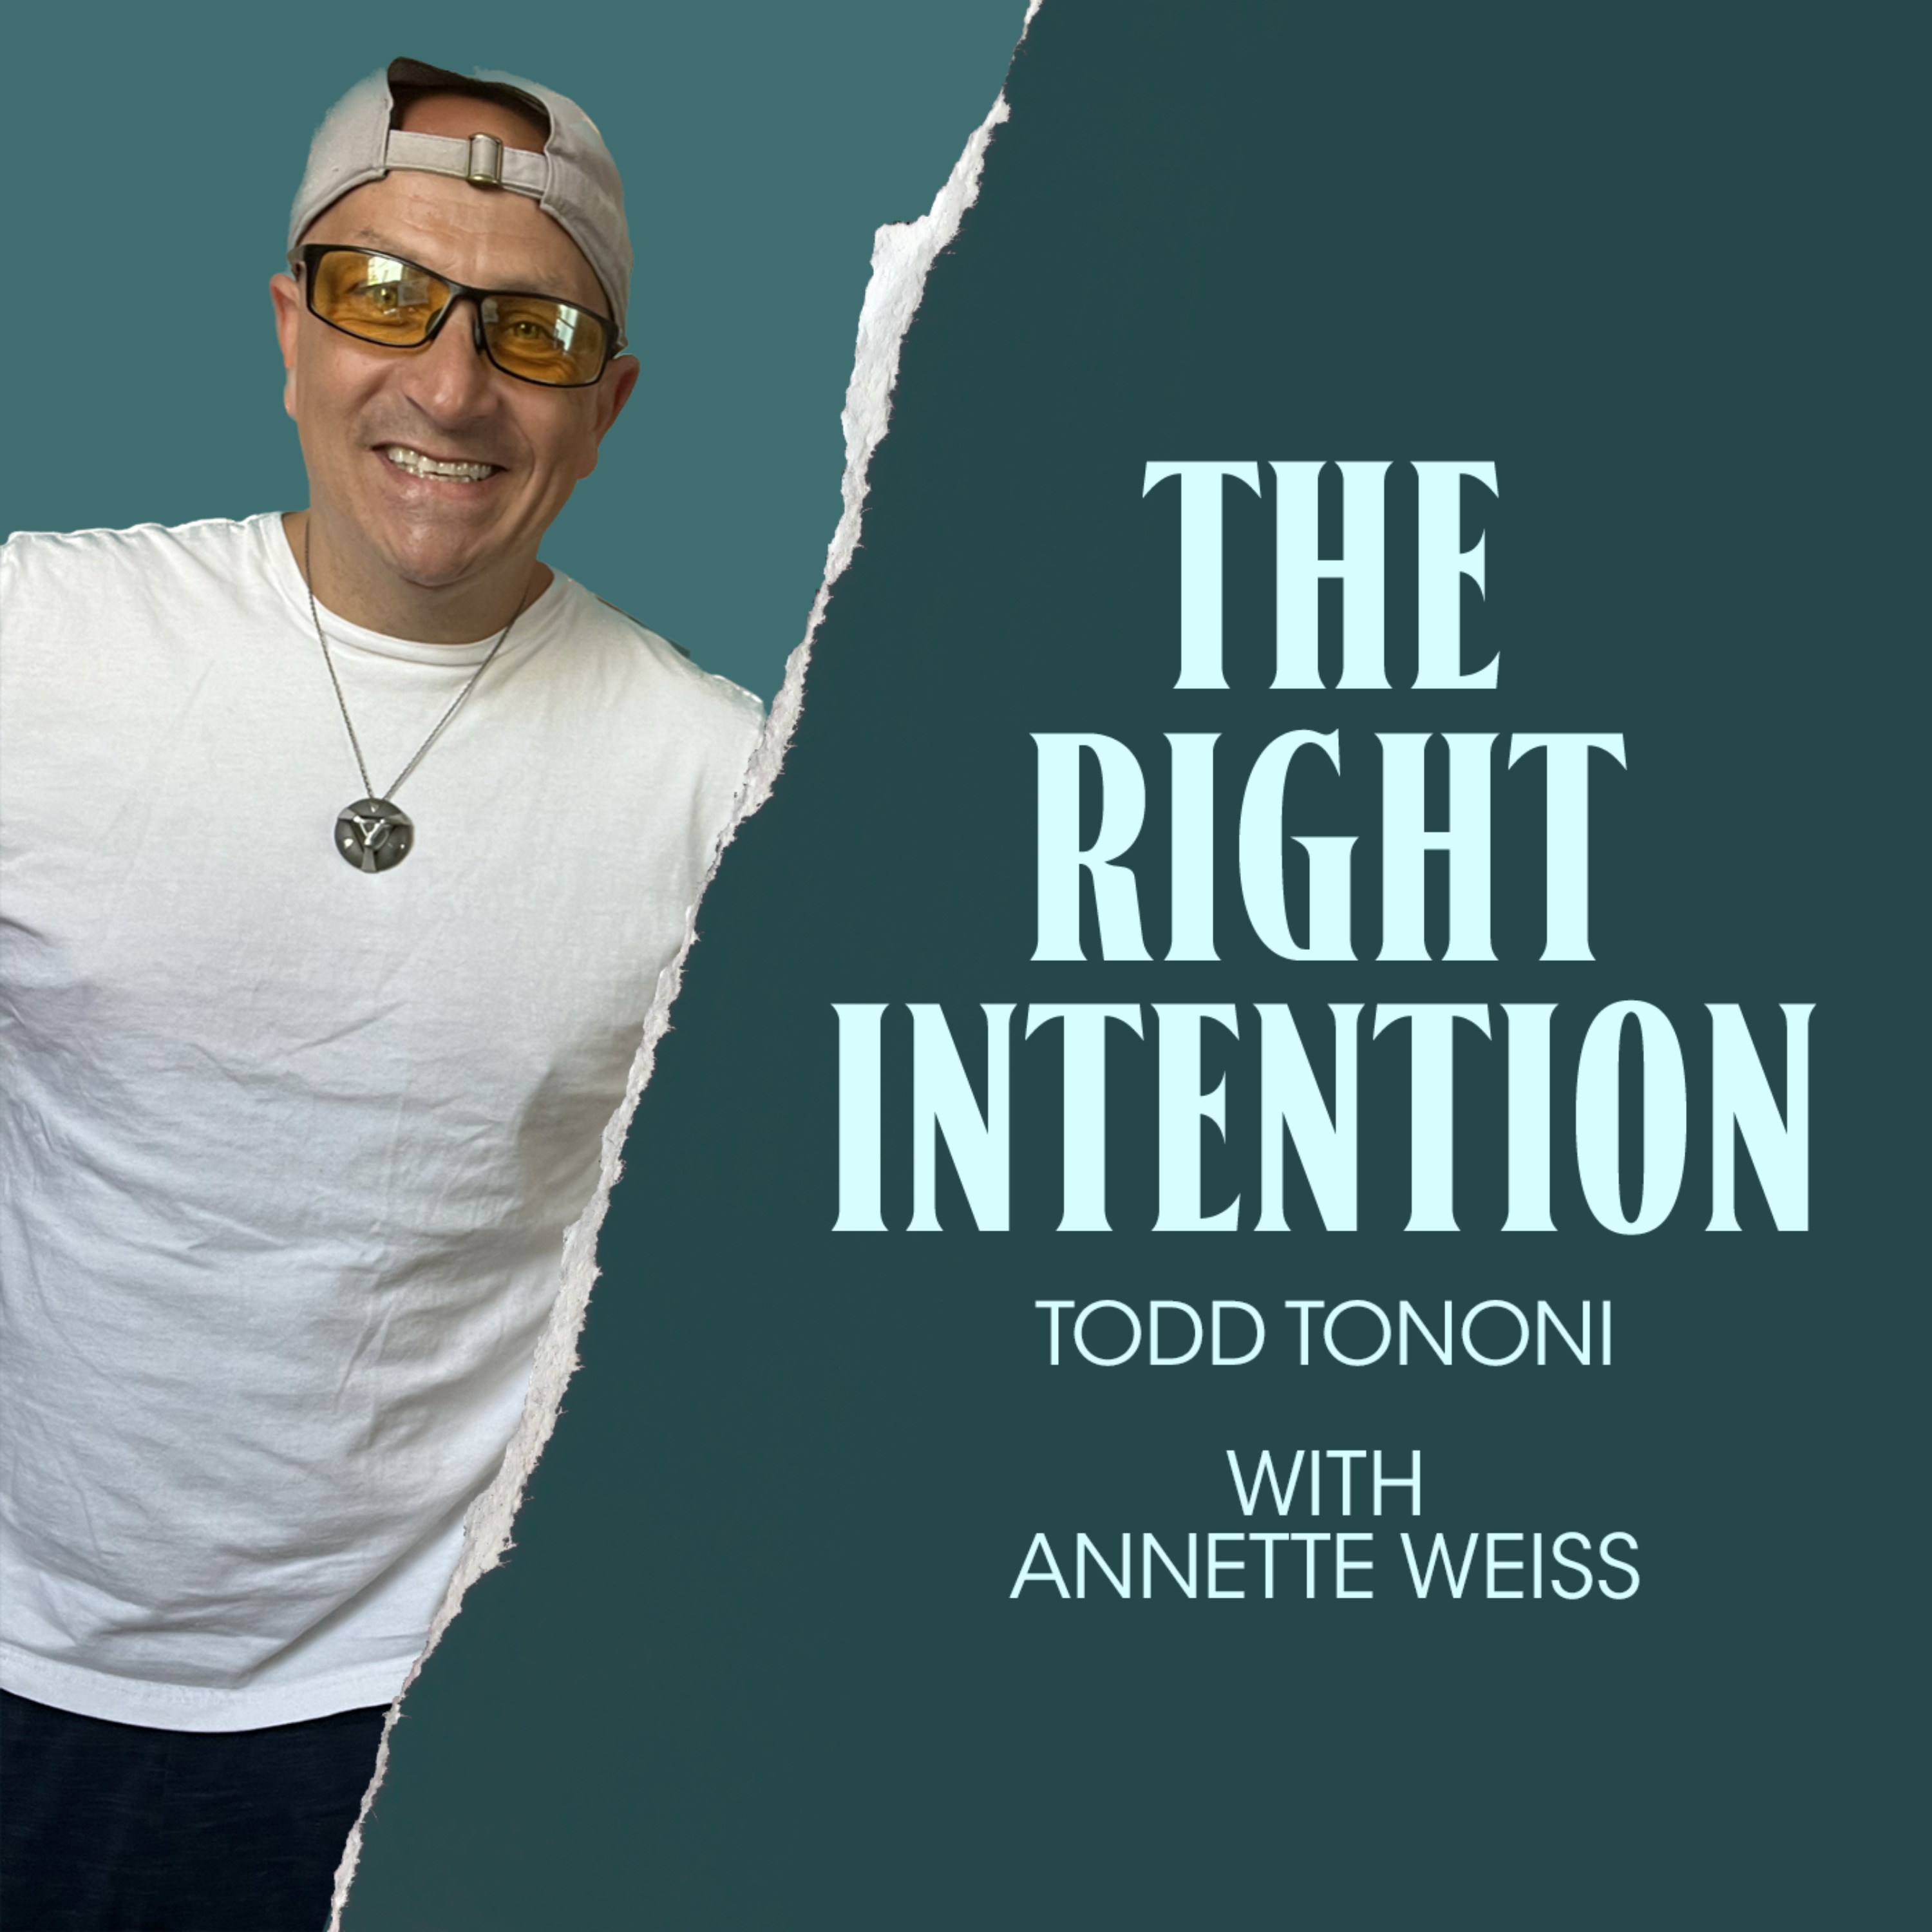 The Right Intention with Annette Weiss